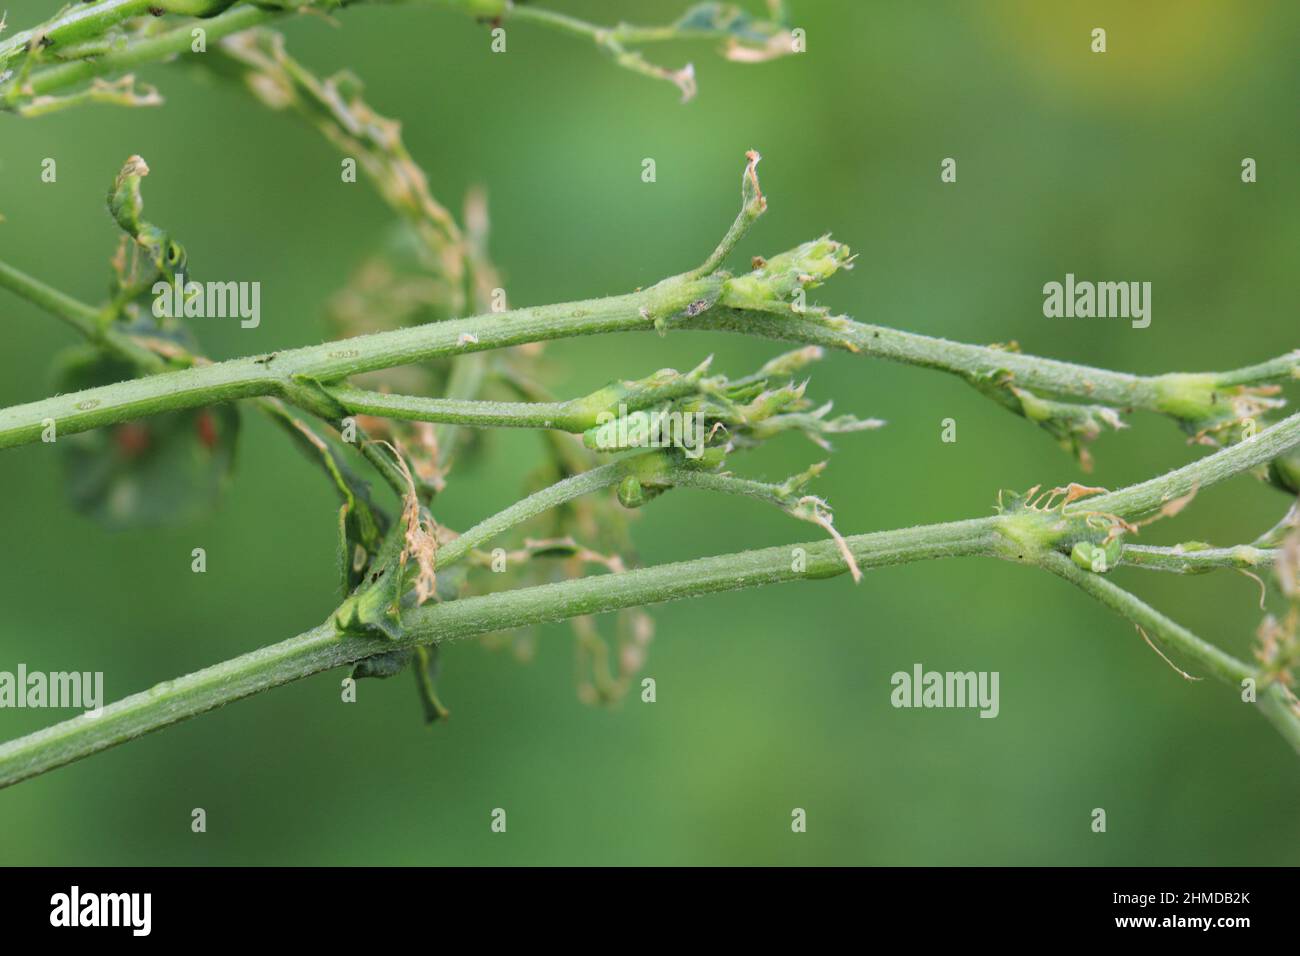 Alfalfa plant damaged by larvae of Lucerne weevil - Hypera postica. It is a dangerous pest of this crop plant. Stock Photo